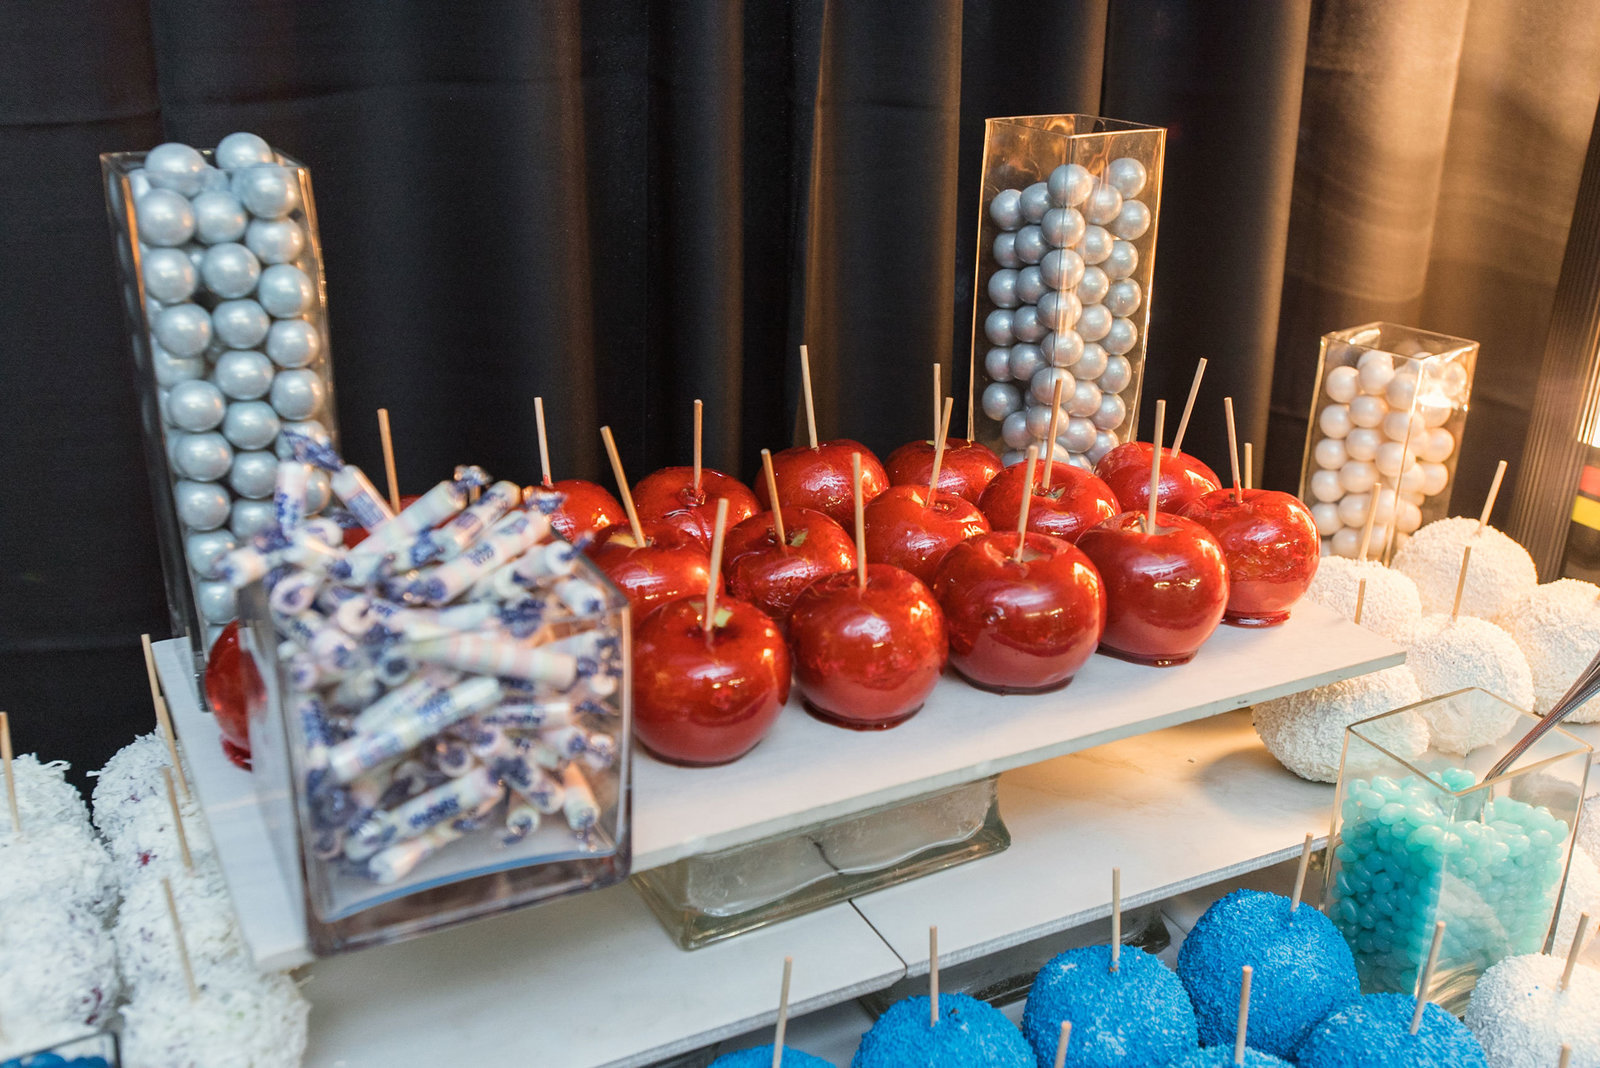 Candy apple at dessert table at Cradle of Aviation